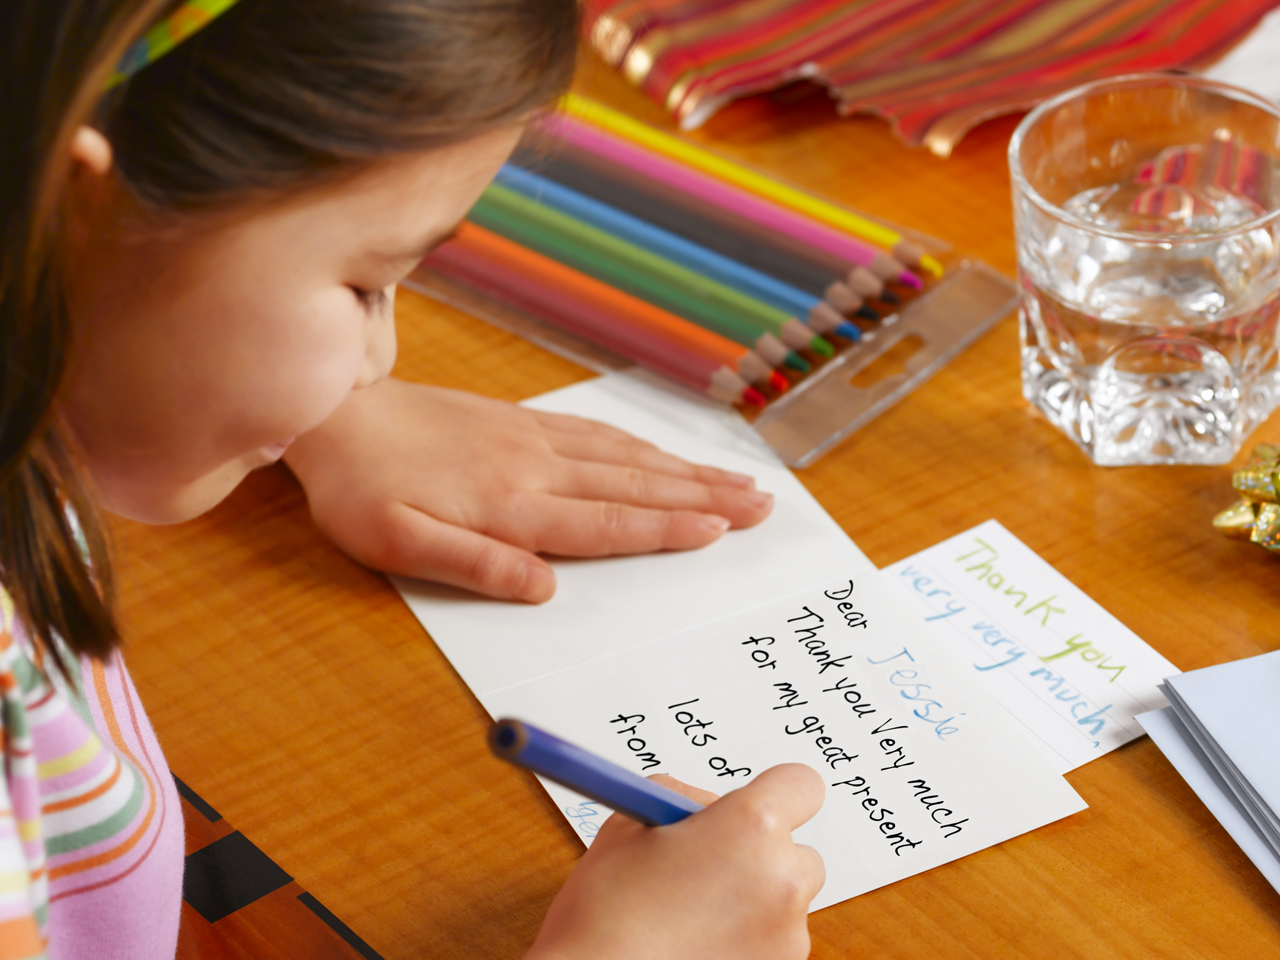 Should kids be forced to write thank-you notes? - TODAY.com